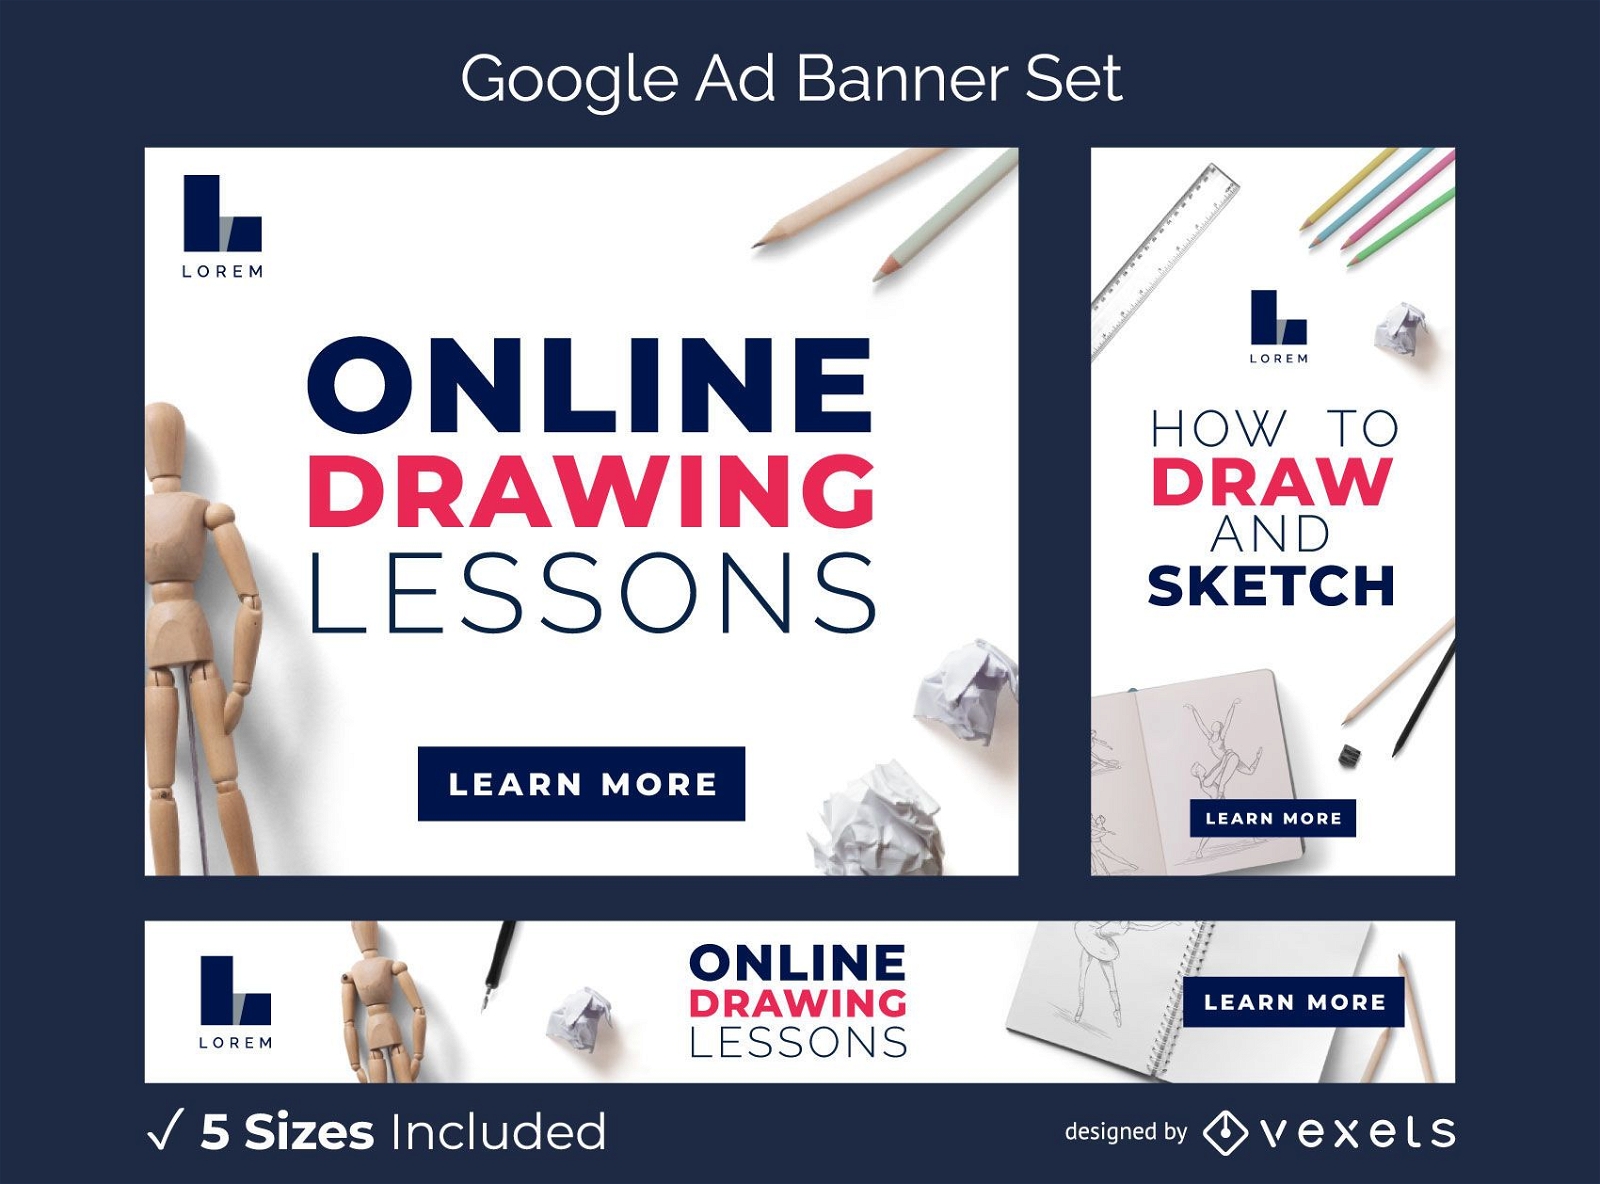 Online drawing lessons ad banner set